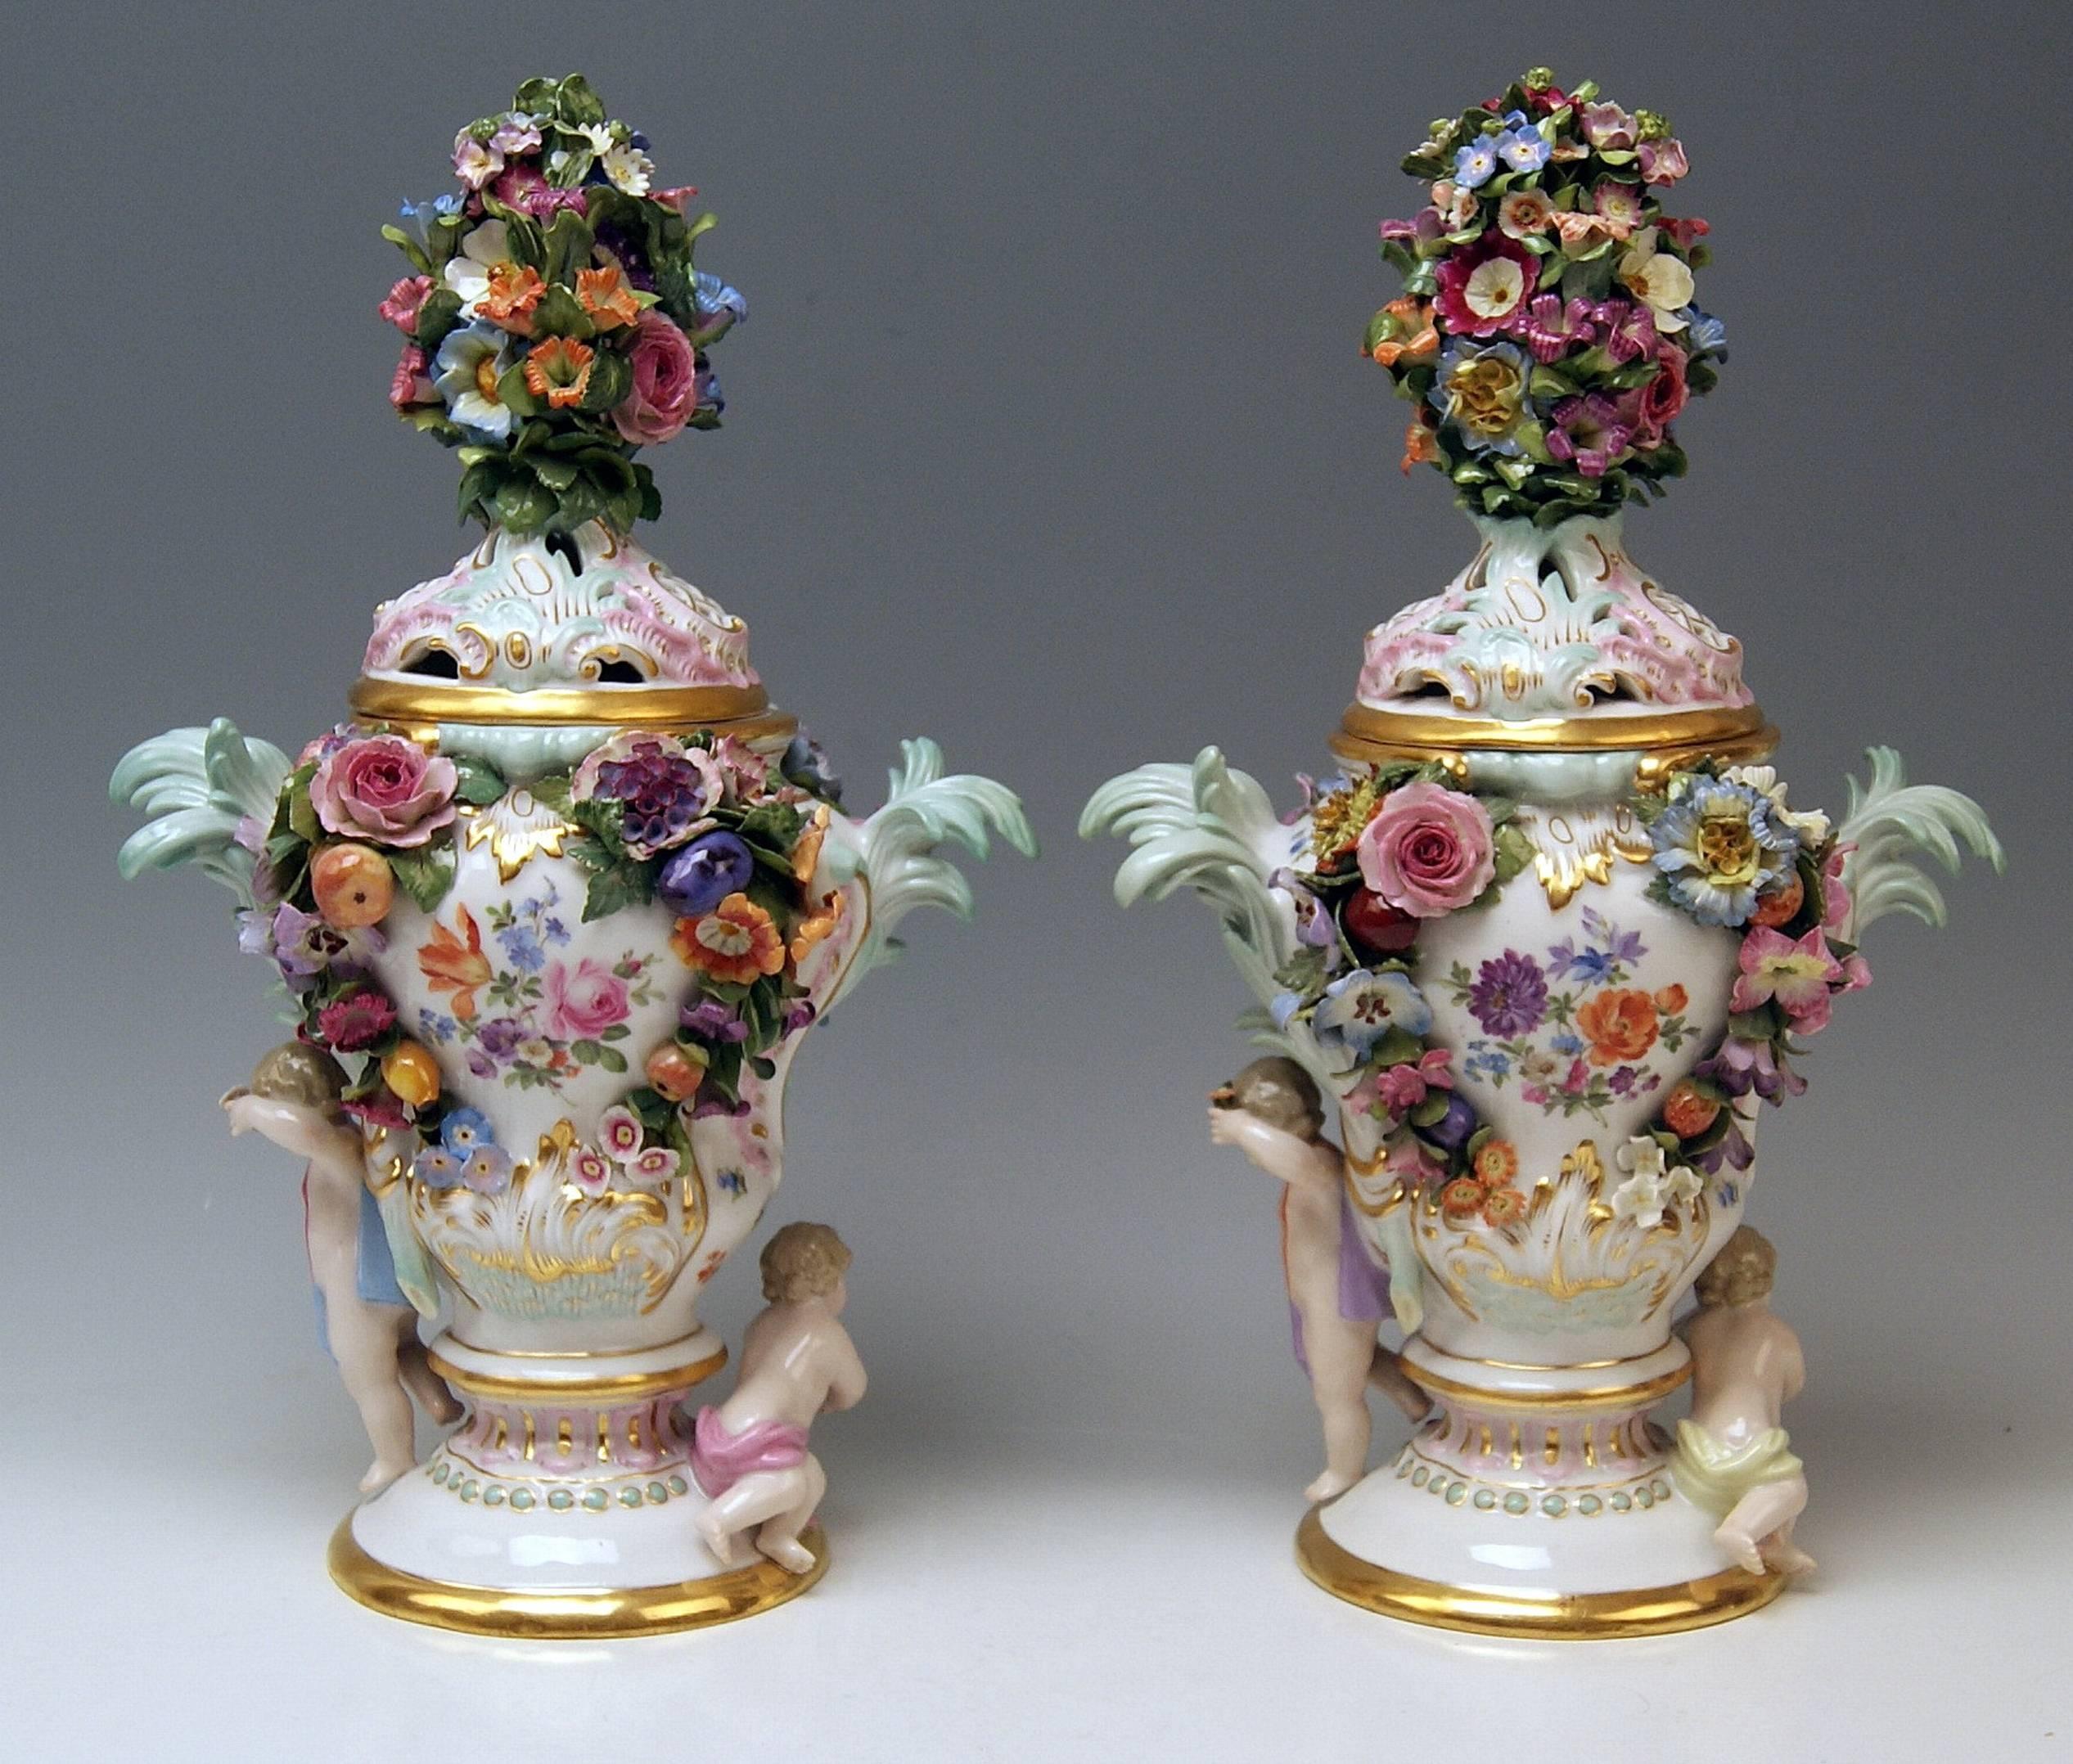 Meissen gorgeous quite rare items: a pair of potpourri lidded vases with abundant sculptured decorations as well as with nicest Watteau paintings.

Measures:
Total height: 35.0 cm (13.77 inches) lid included.
Total width: 22.0 cm ( 8.66